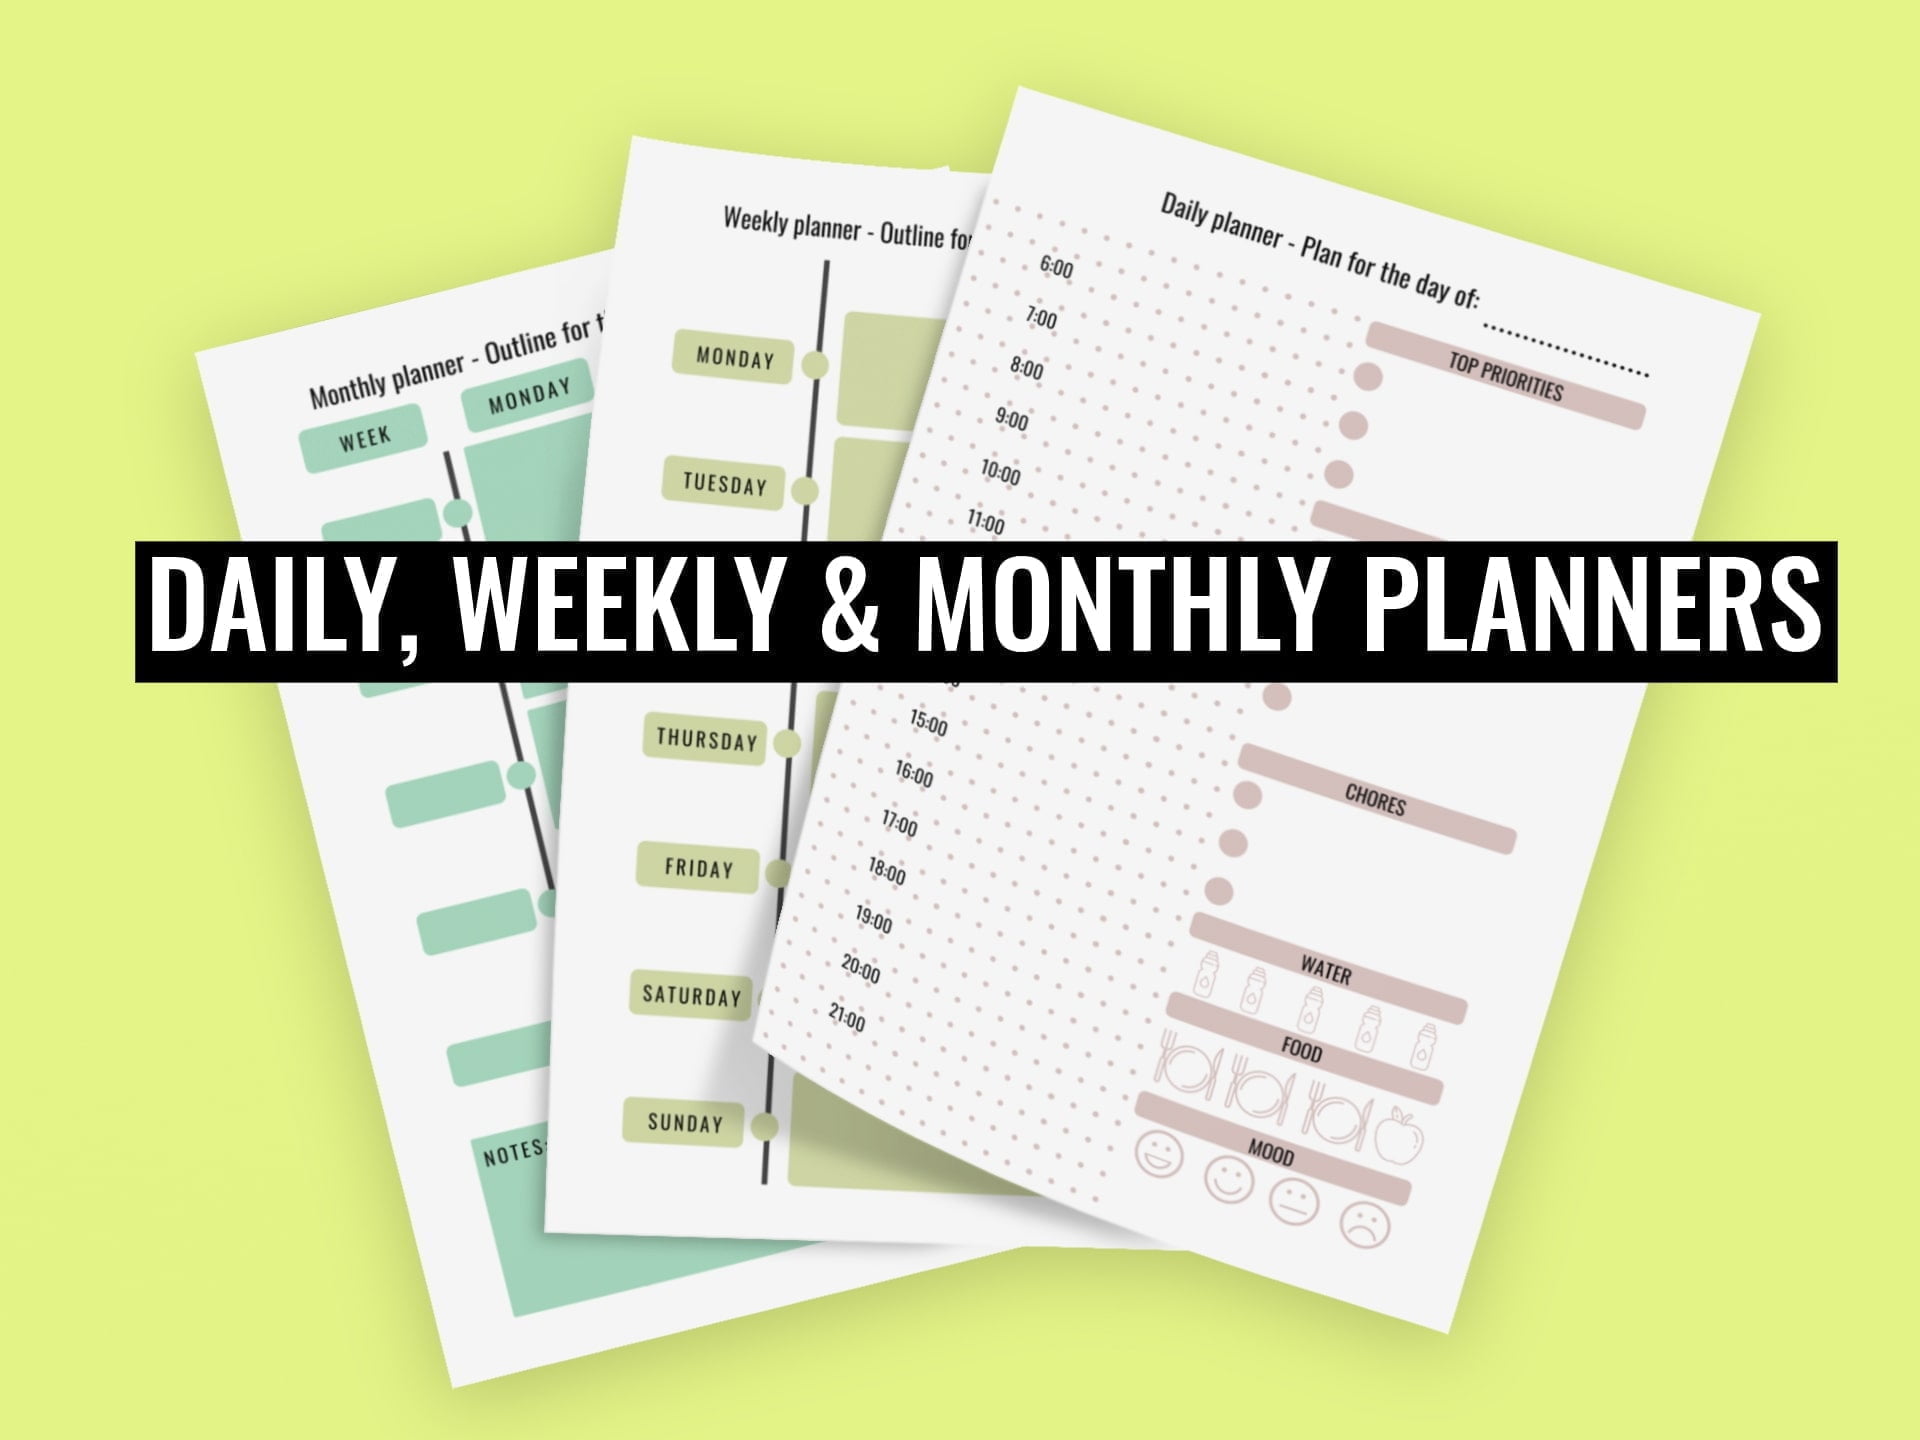 DAILY WEEKLY AND MONTHLY PLANNERS